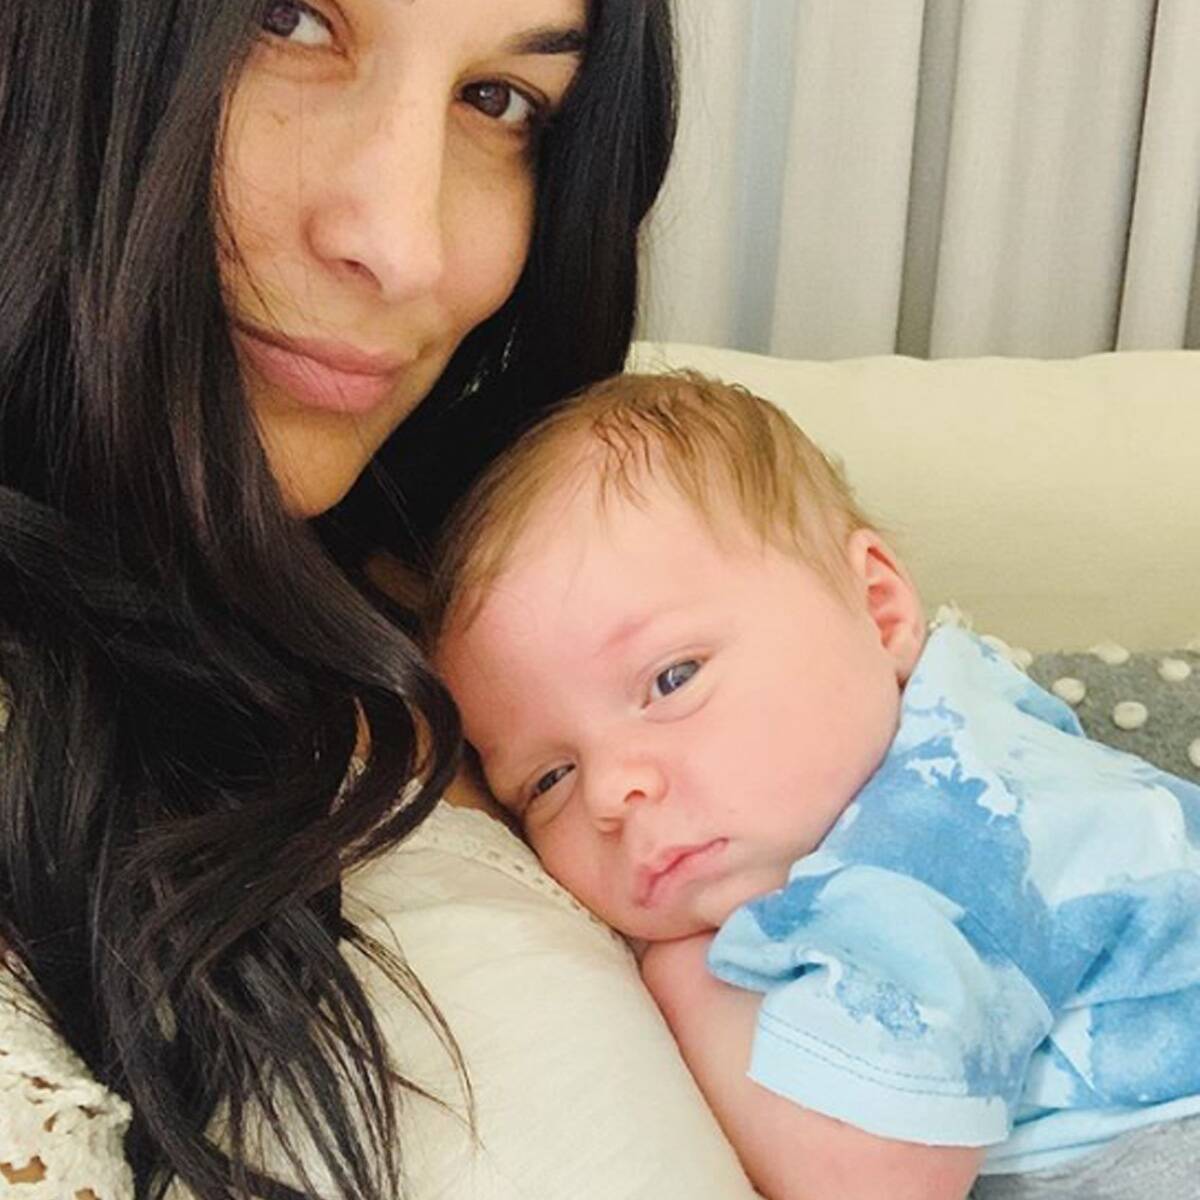 Brie Bella's Photos of Son Buddy's Baby Teeth Will Melt Your Heart